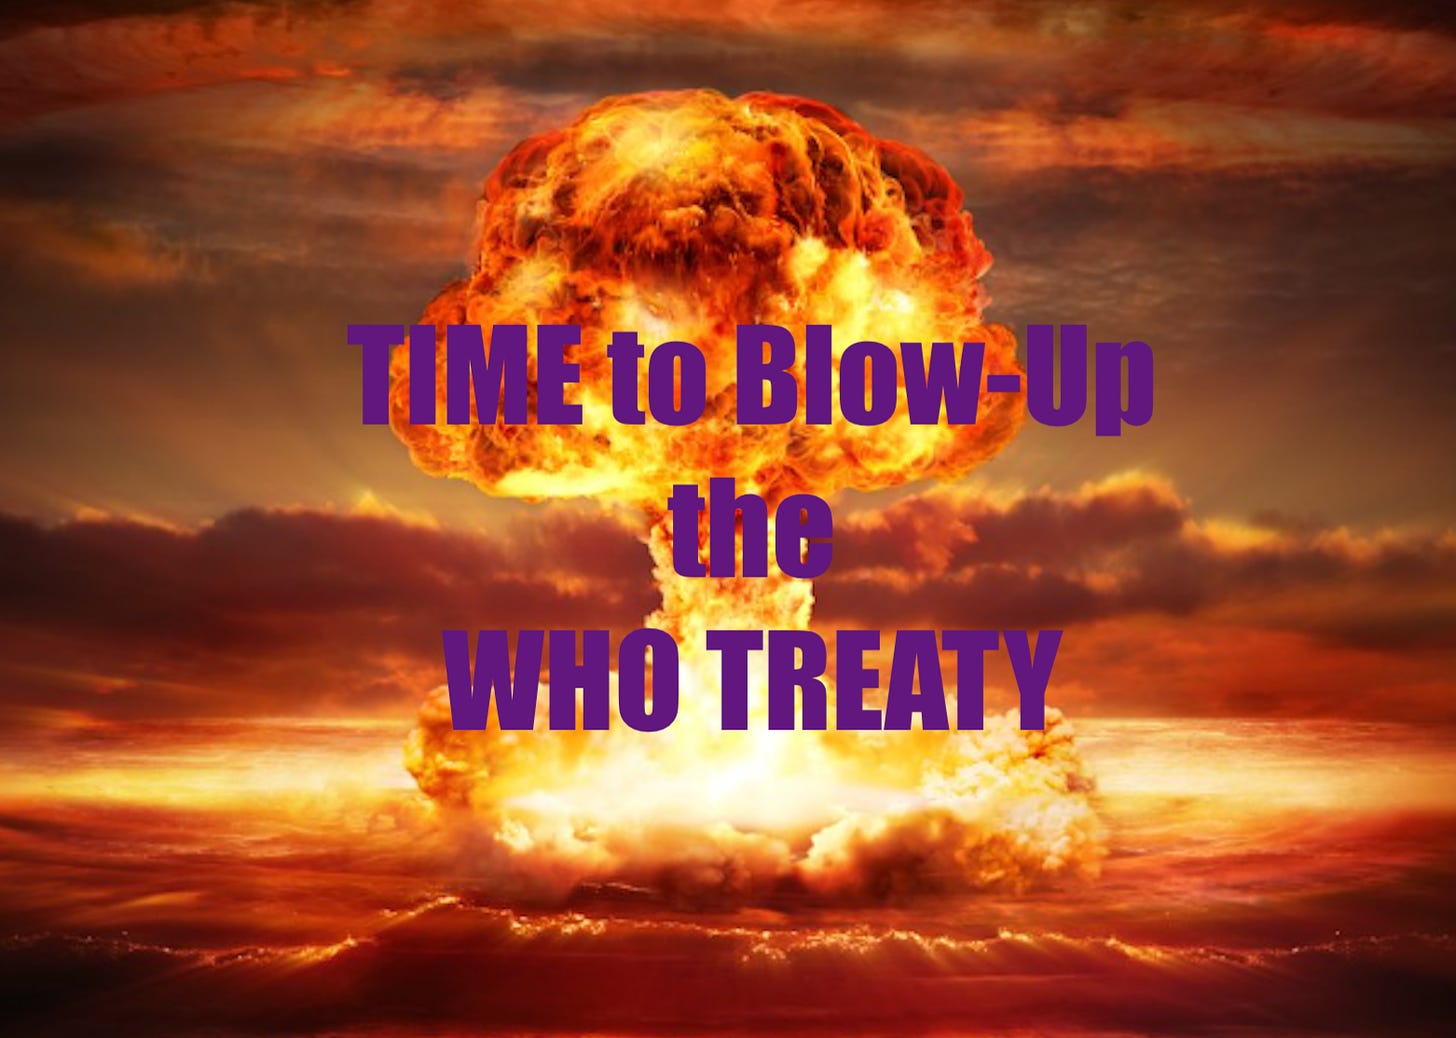 Time to End the Proposed WHO Treaty Now